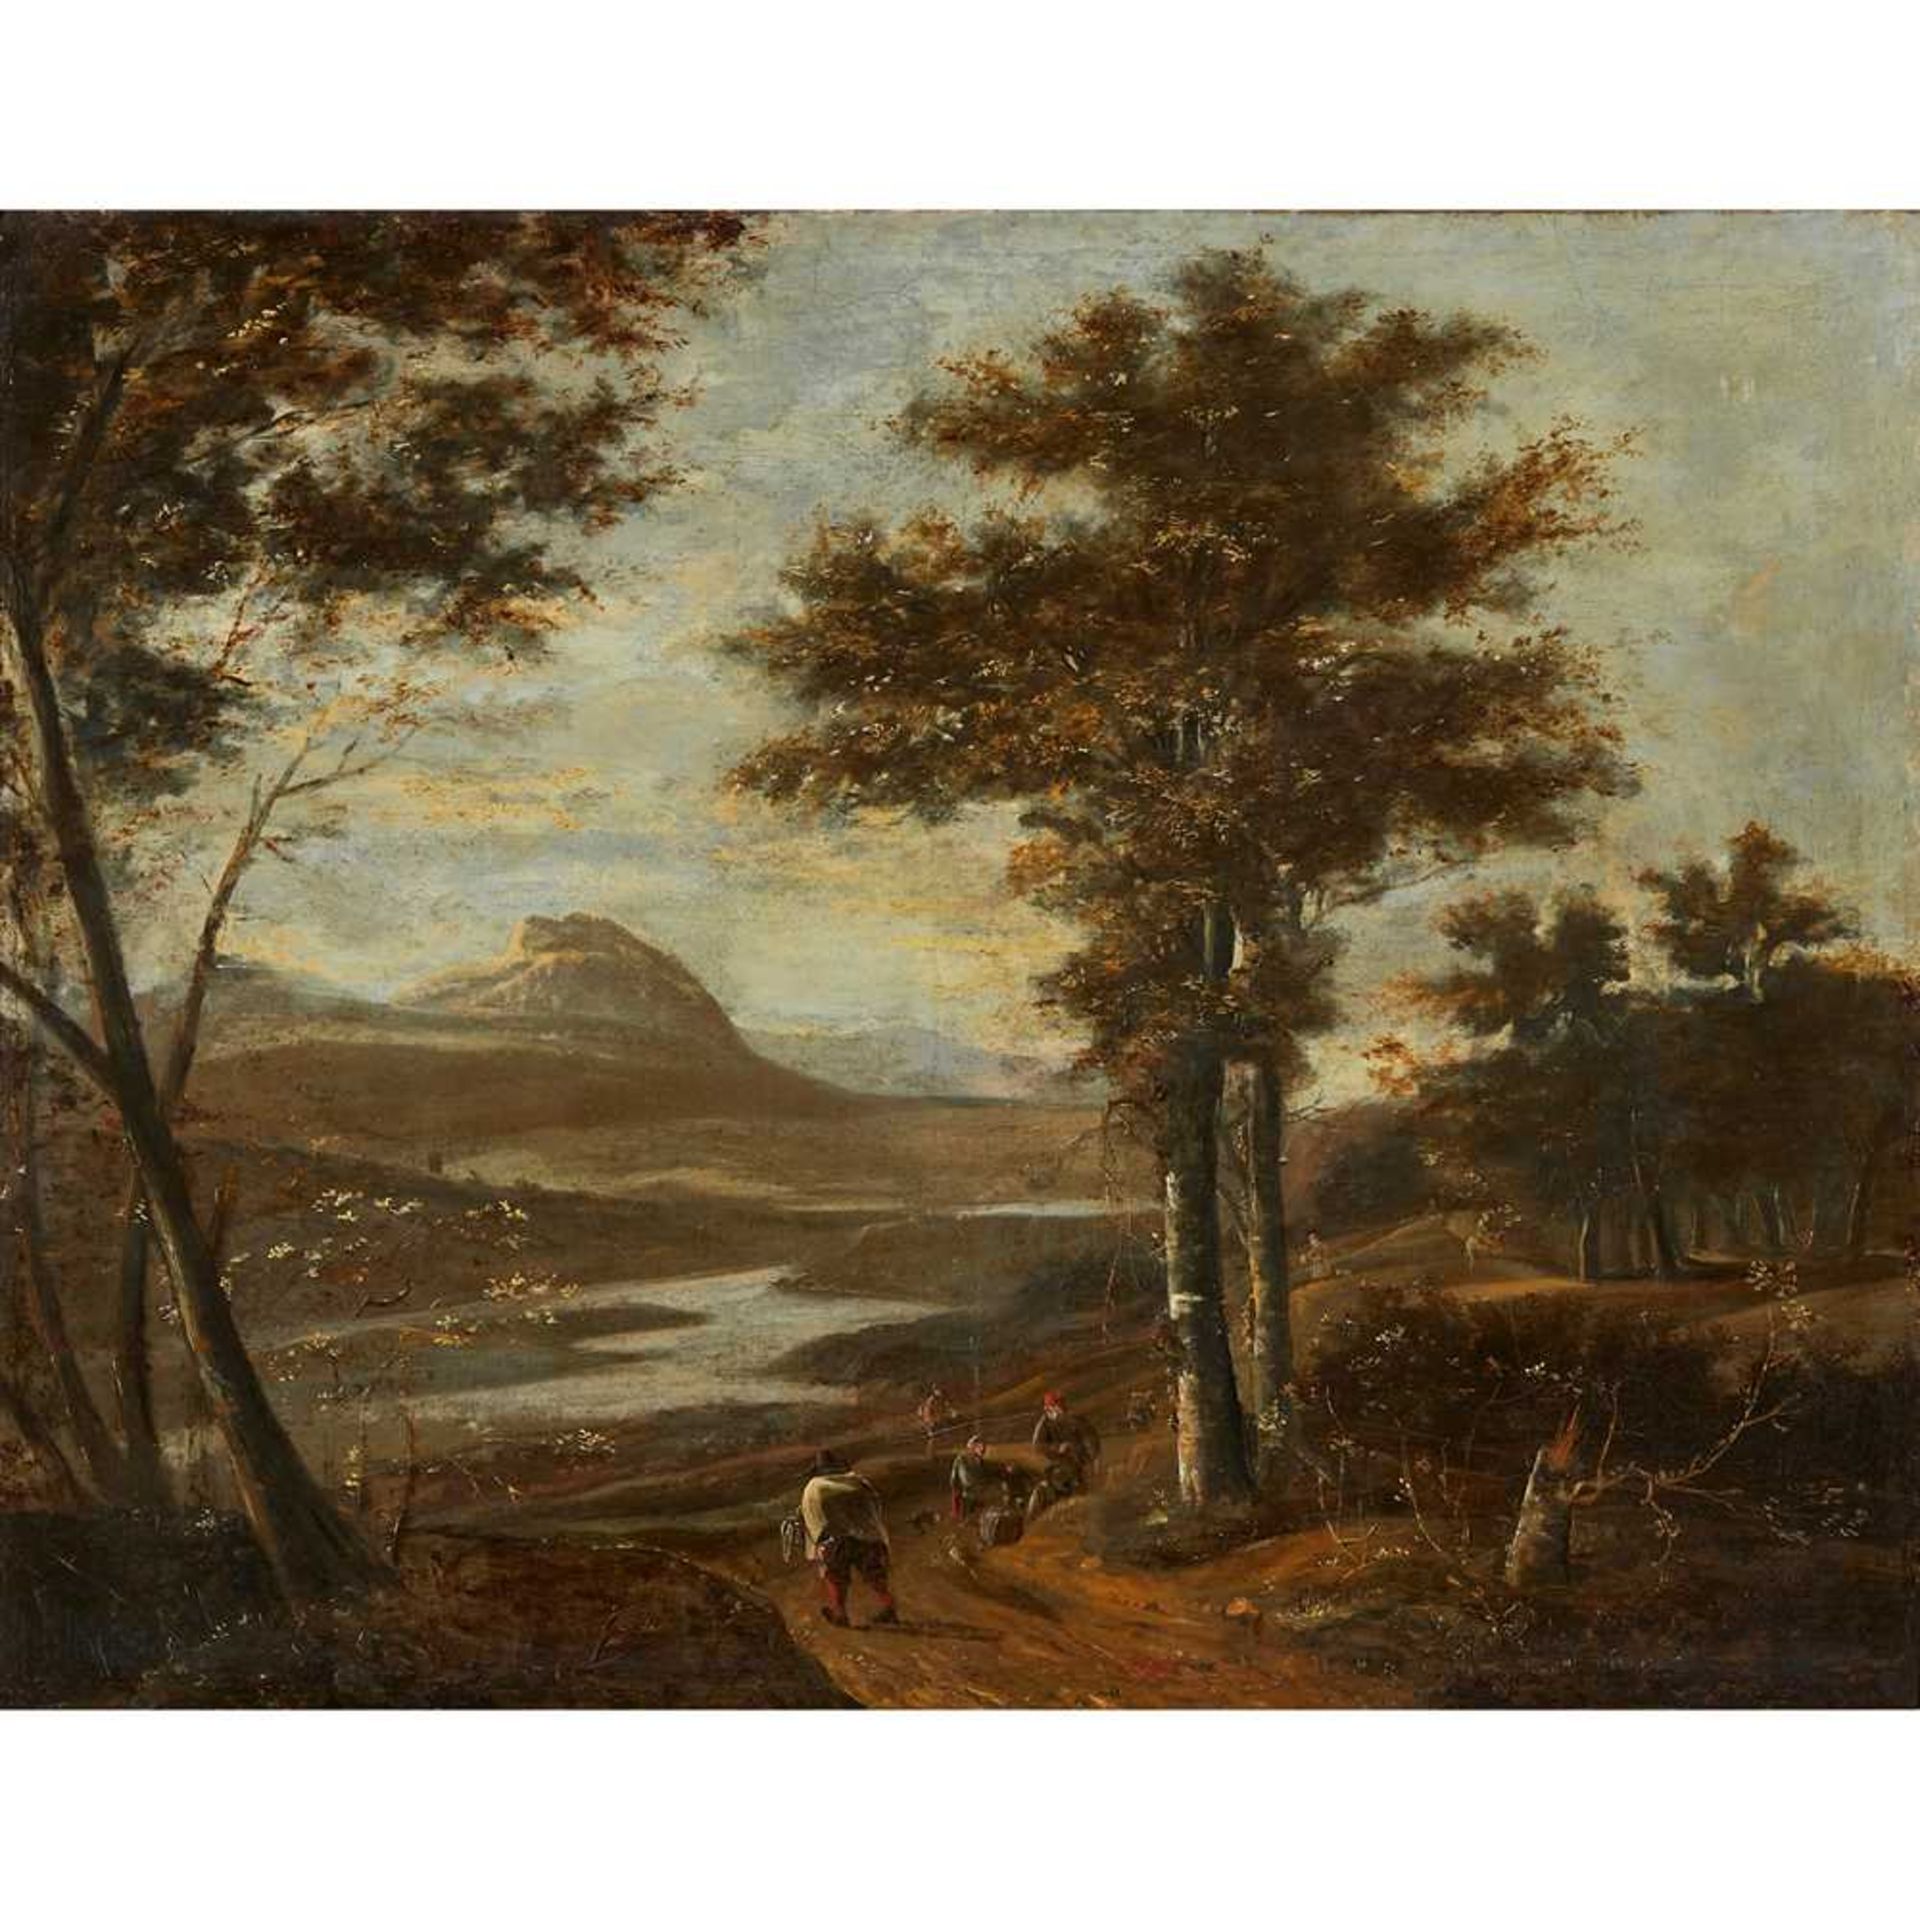 18TH CENTURY DUTCH SCHOOL TRAVELLERS IN A WOODED RIVER LANDSCAPE